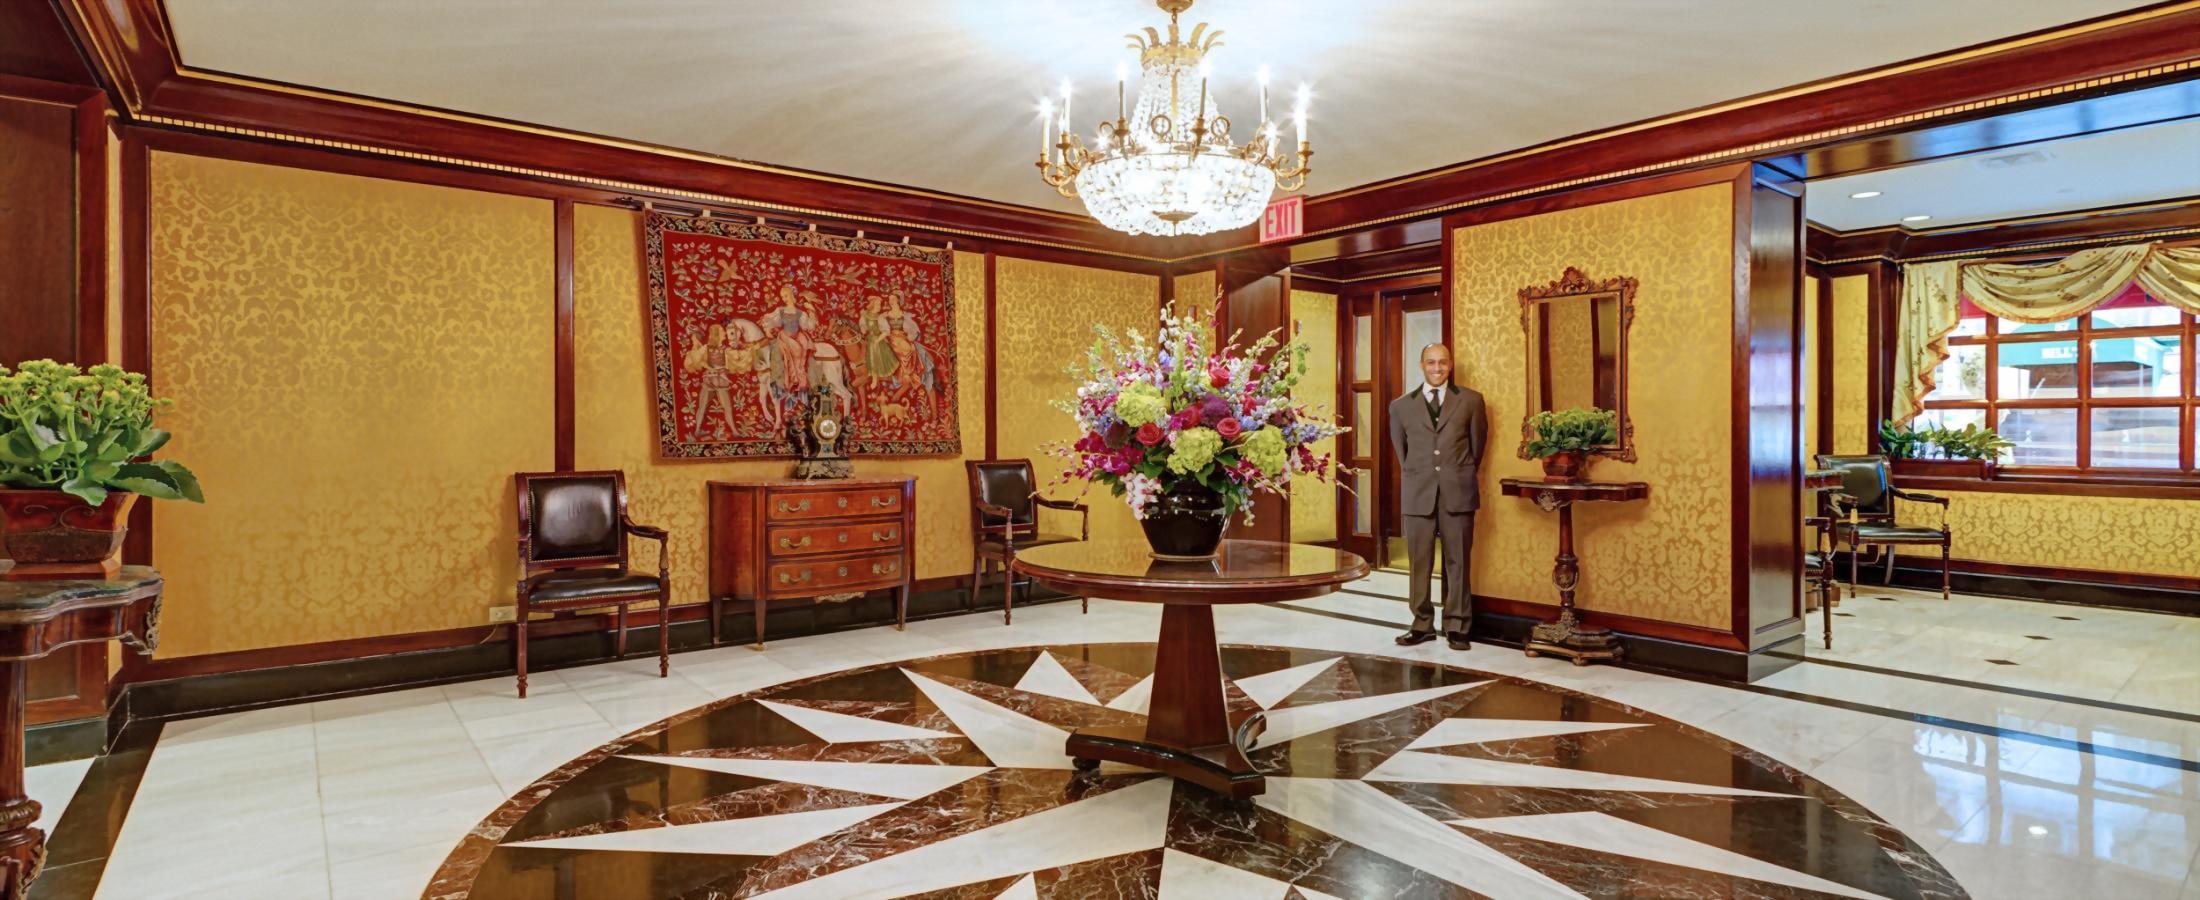 The grand lobby at the Hotel Elysée is always welcoming and decorated with beautiful fresh flowers.